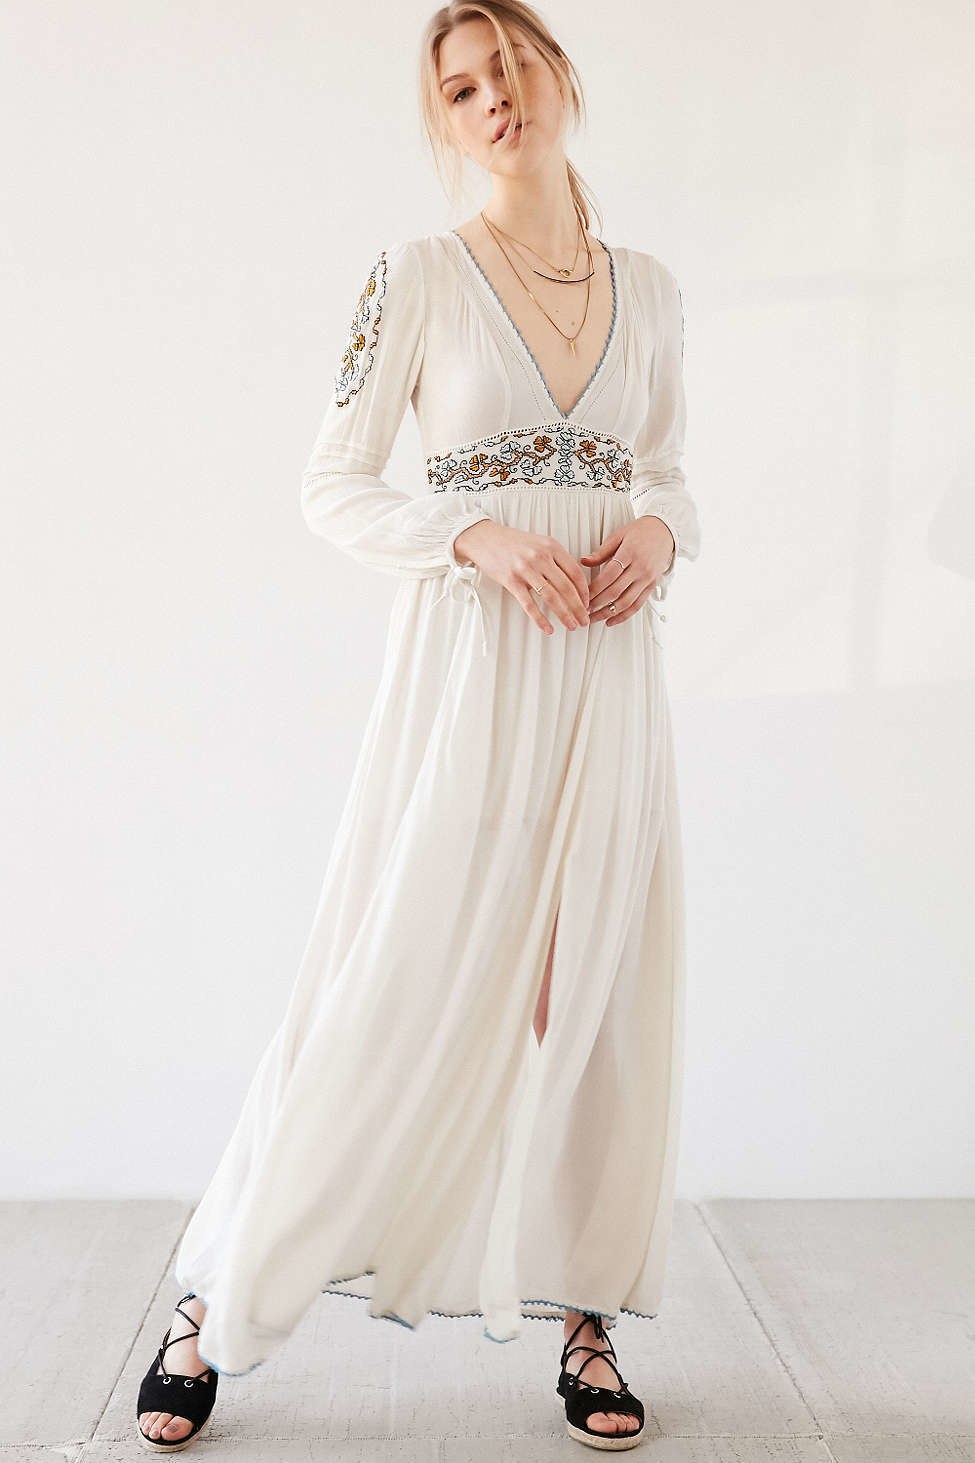 Ecote Sweet Surrender Embroidered Maxi, $198, [urbanoutfitters.com](http://www.urbanoutfitters.com/urban/catalog/productdetail.jsp?id=38645065&category=SEARCH%20RESULTS)